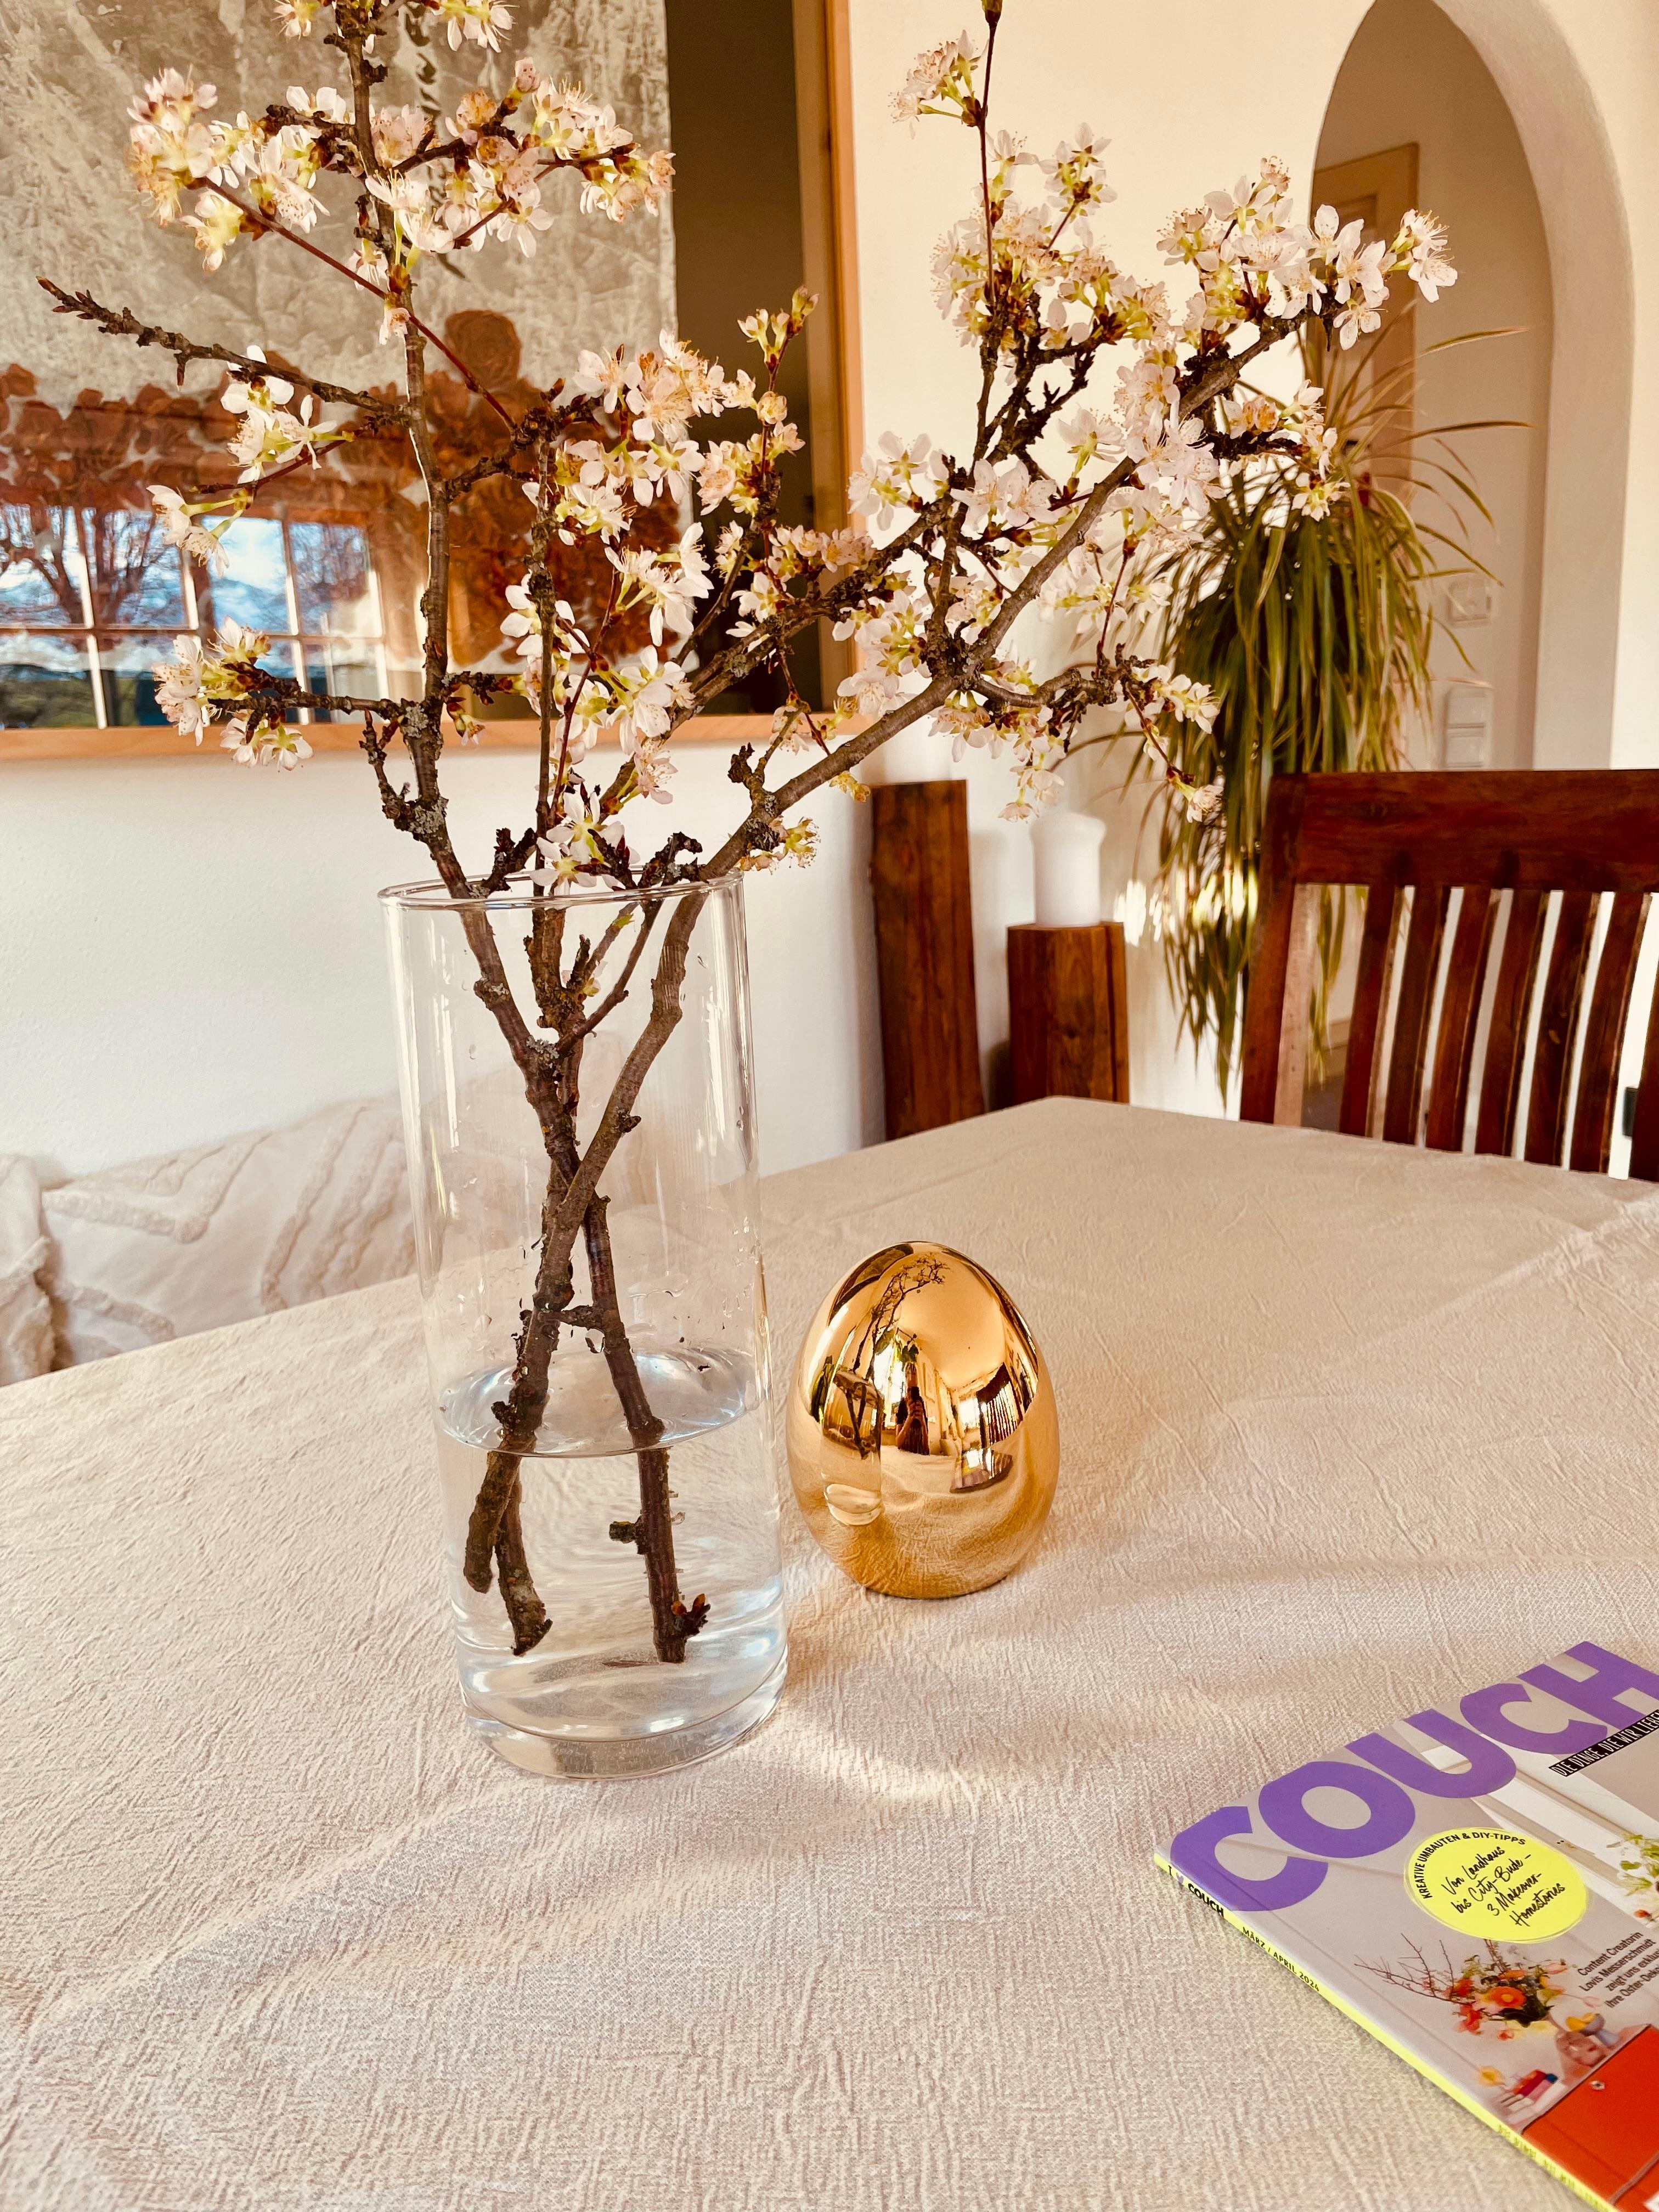 Time for a little bit #easterdecoration und das neue #couchmagazin.  #couchstyle #easteregg #easter #ostern #frühling 